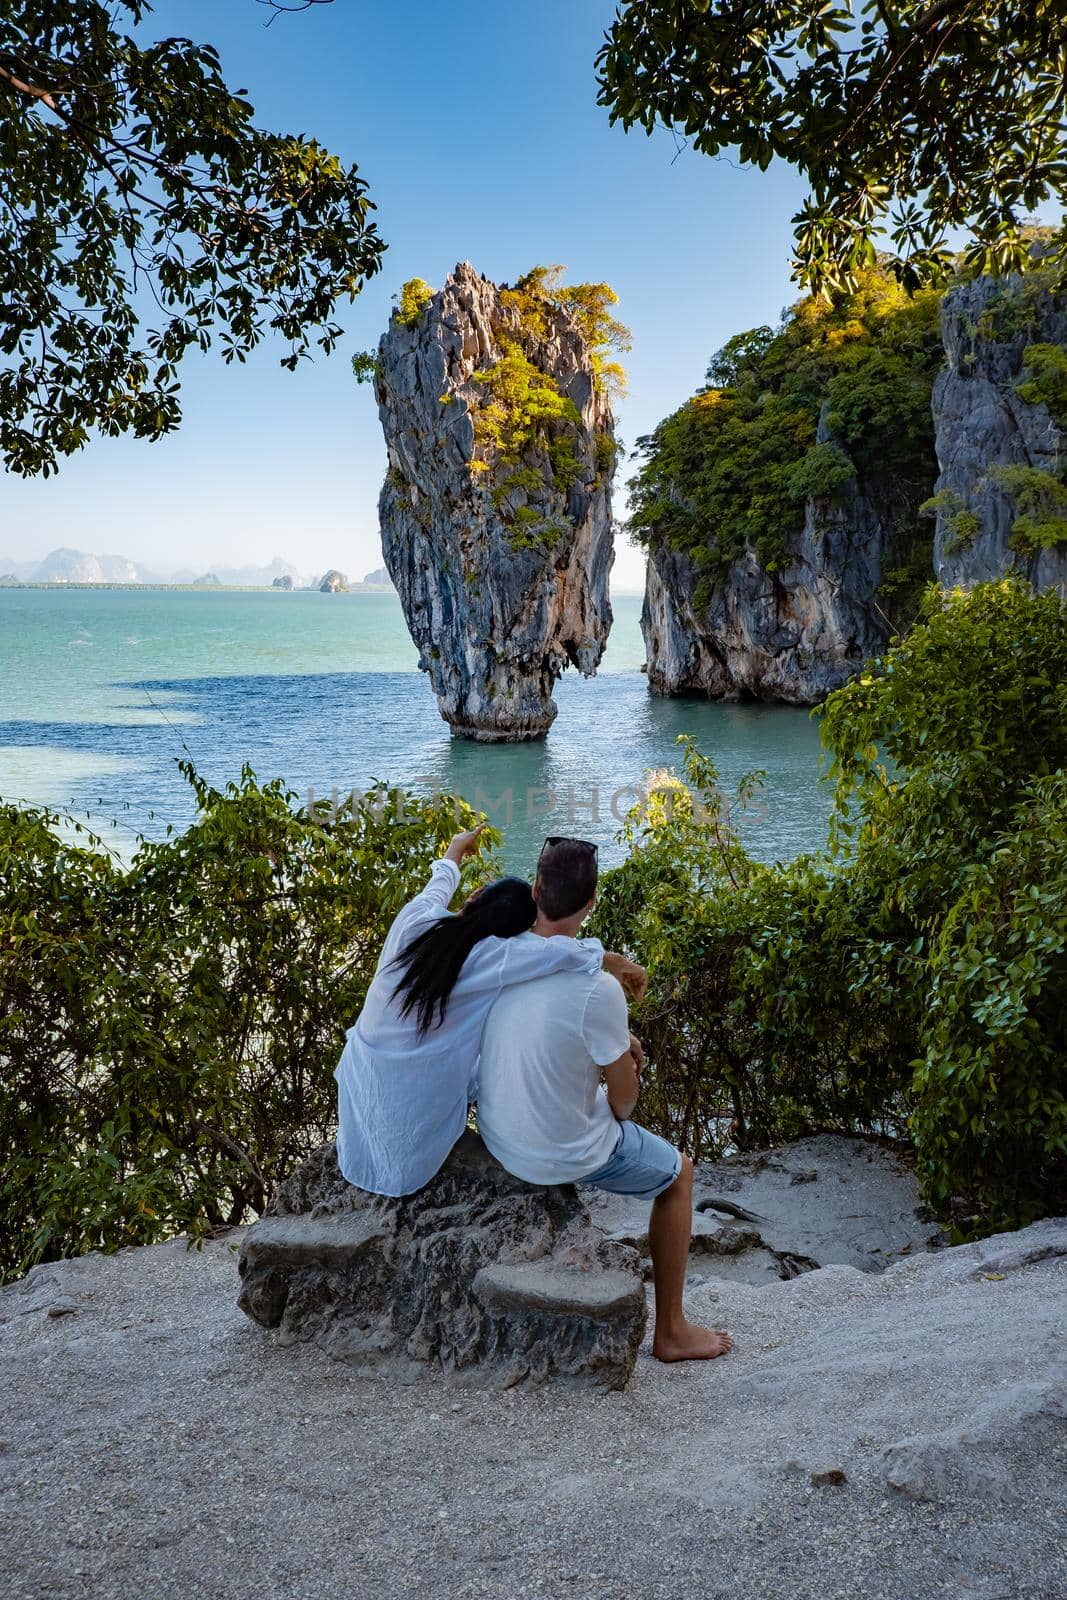 James Bond island near Phuket in Thailand. Famous landmark and famous travel destination, couple men and woman mid age visiting James Bond island in Krabi Thailand. European man and Asian woman on vacation